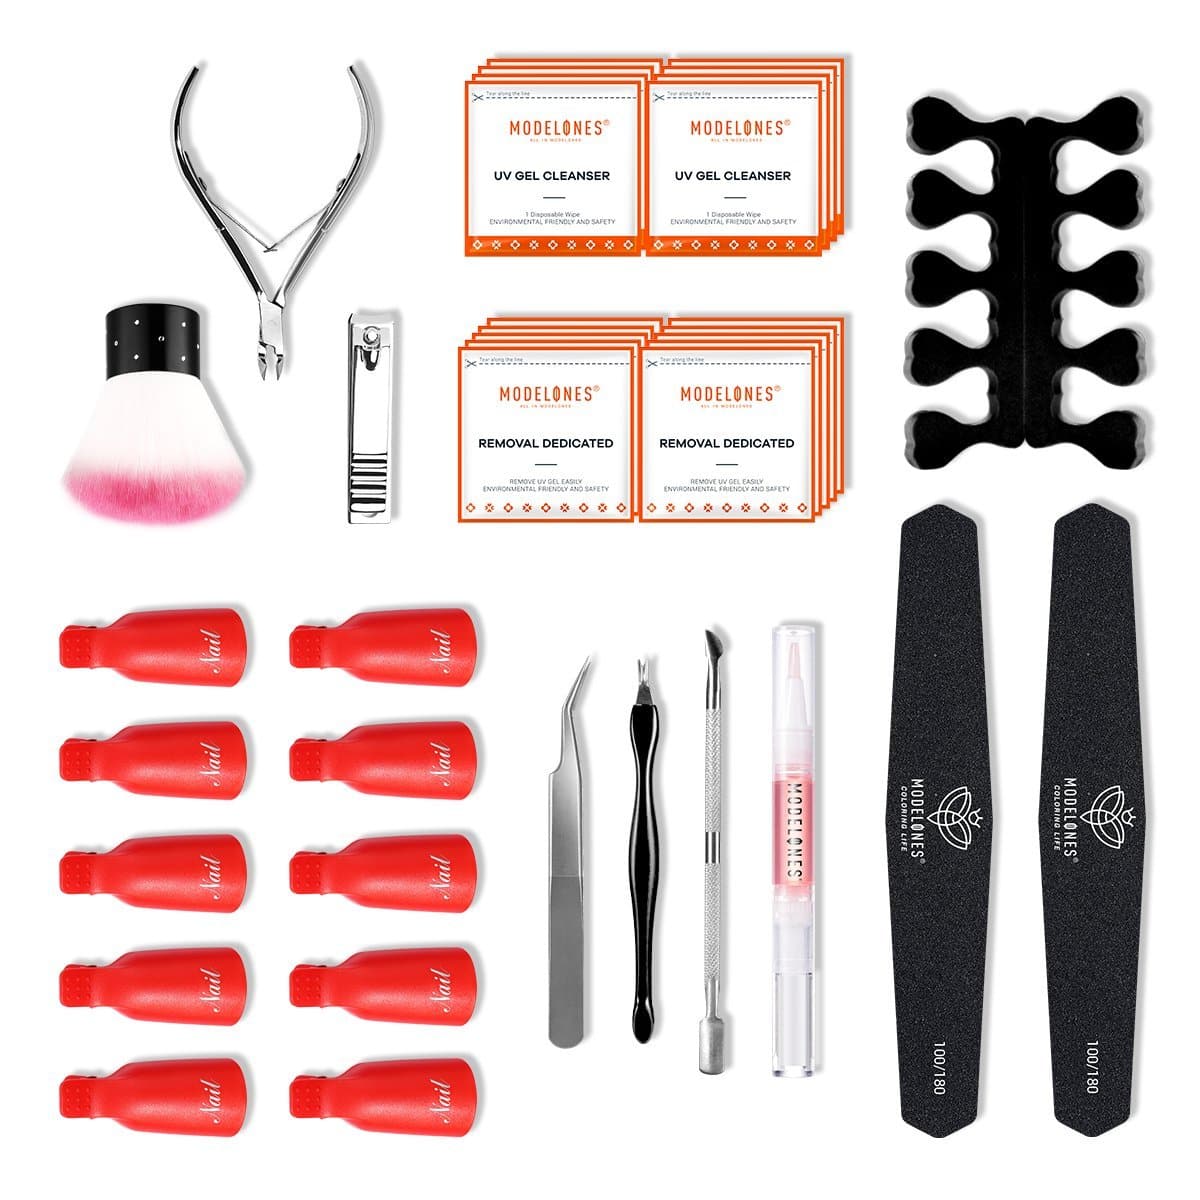 All-in-one Tools Kit - MODELONES.com